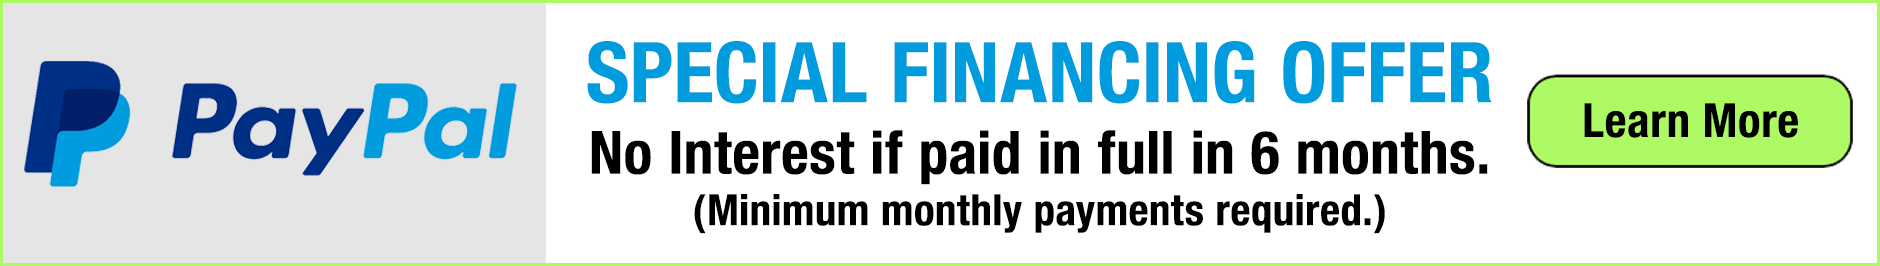 Special Financing Offer through PayPal - No interest if paid in full in 6 months